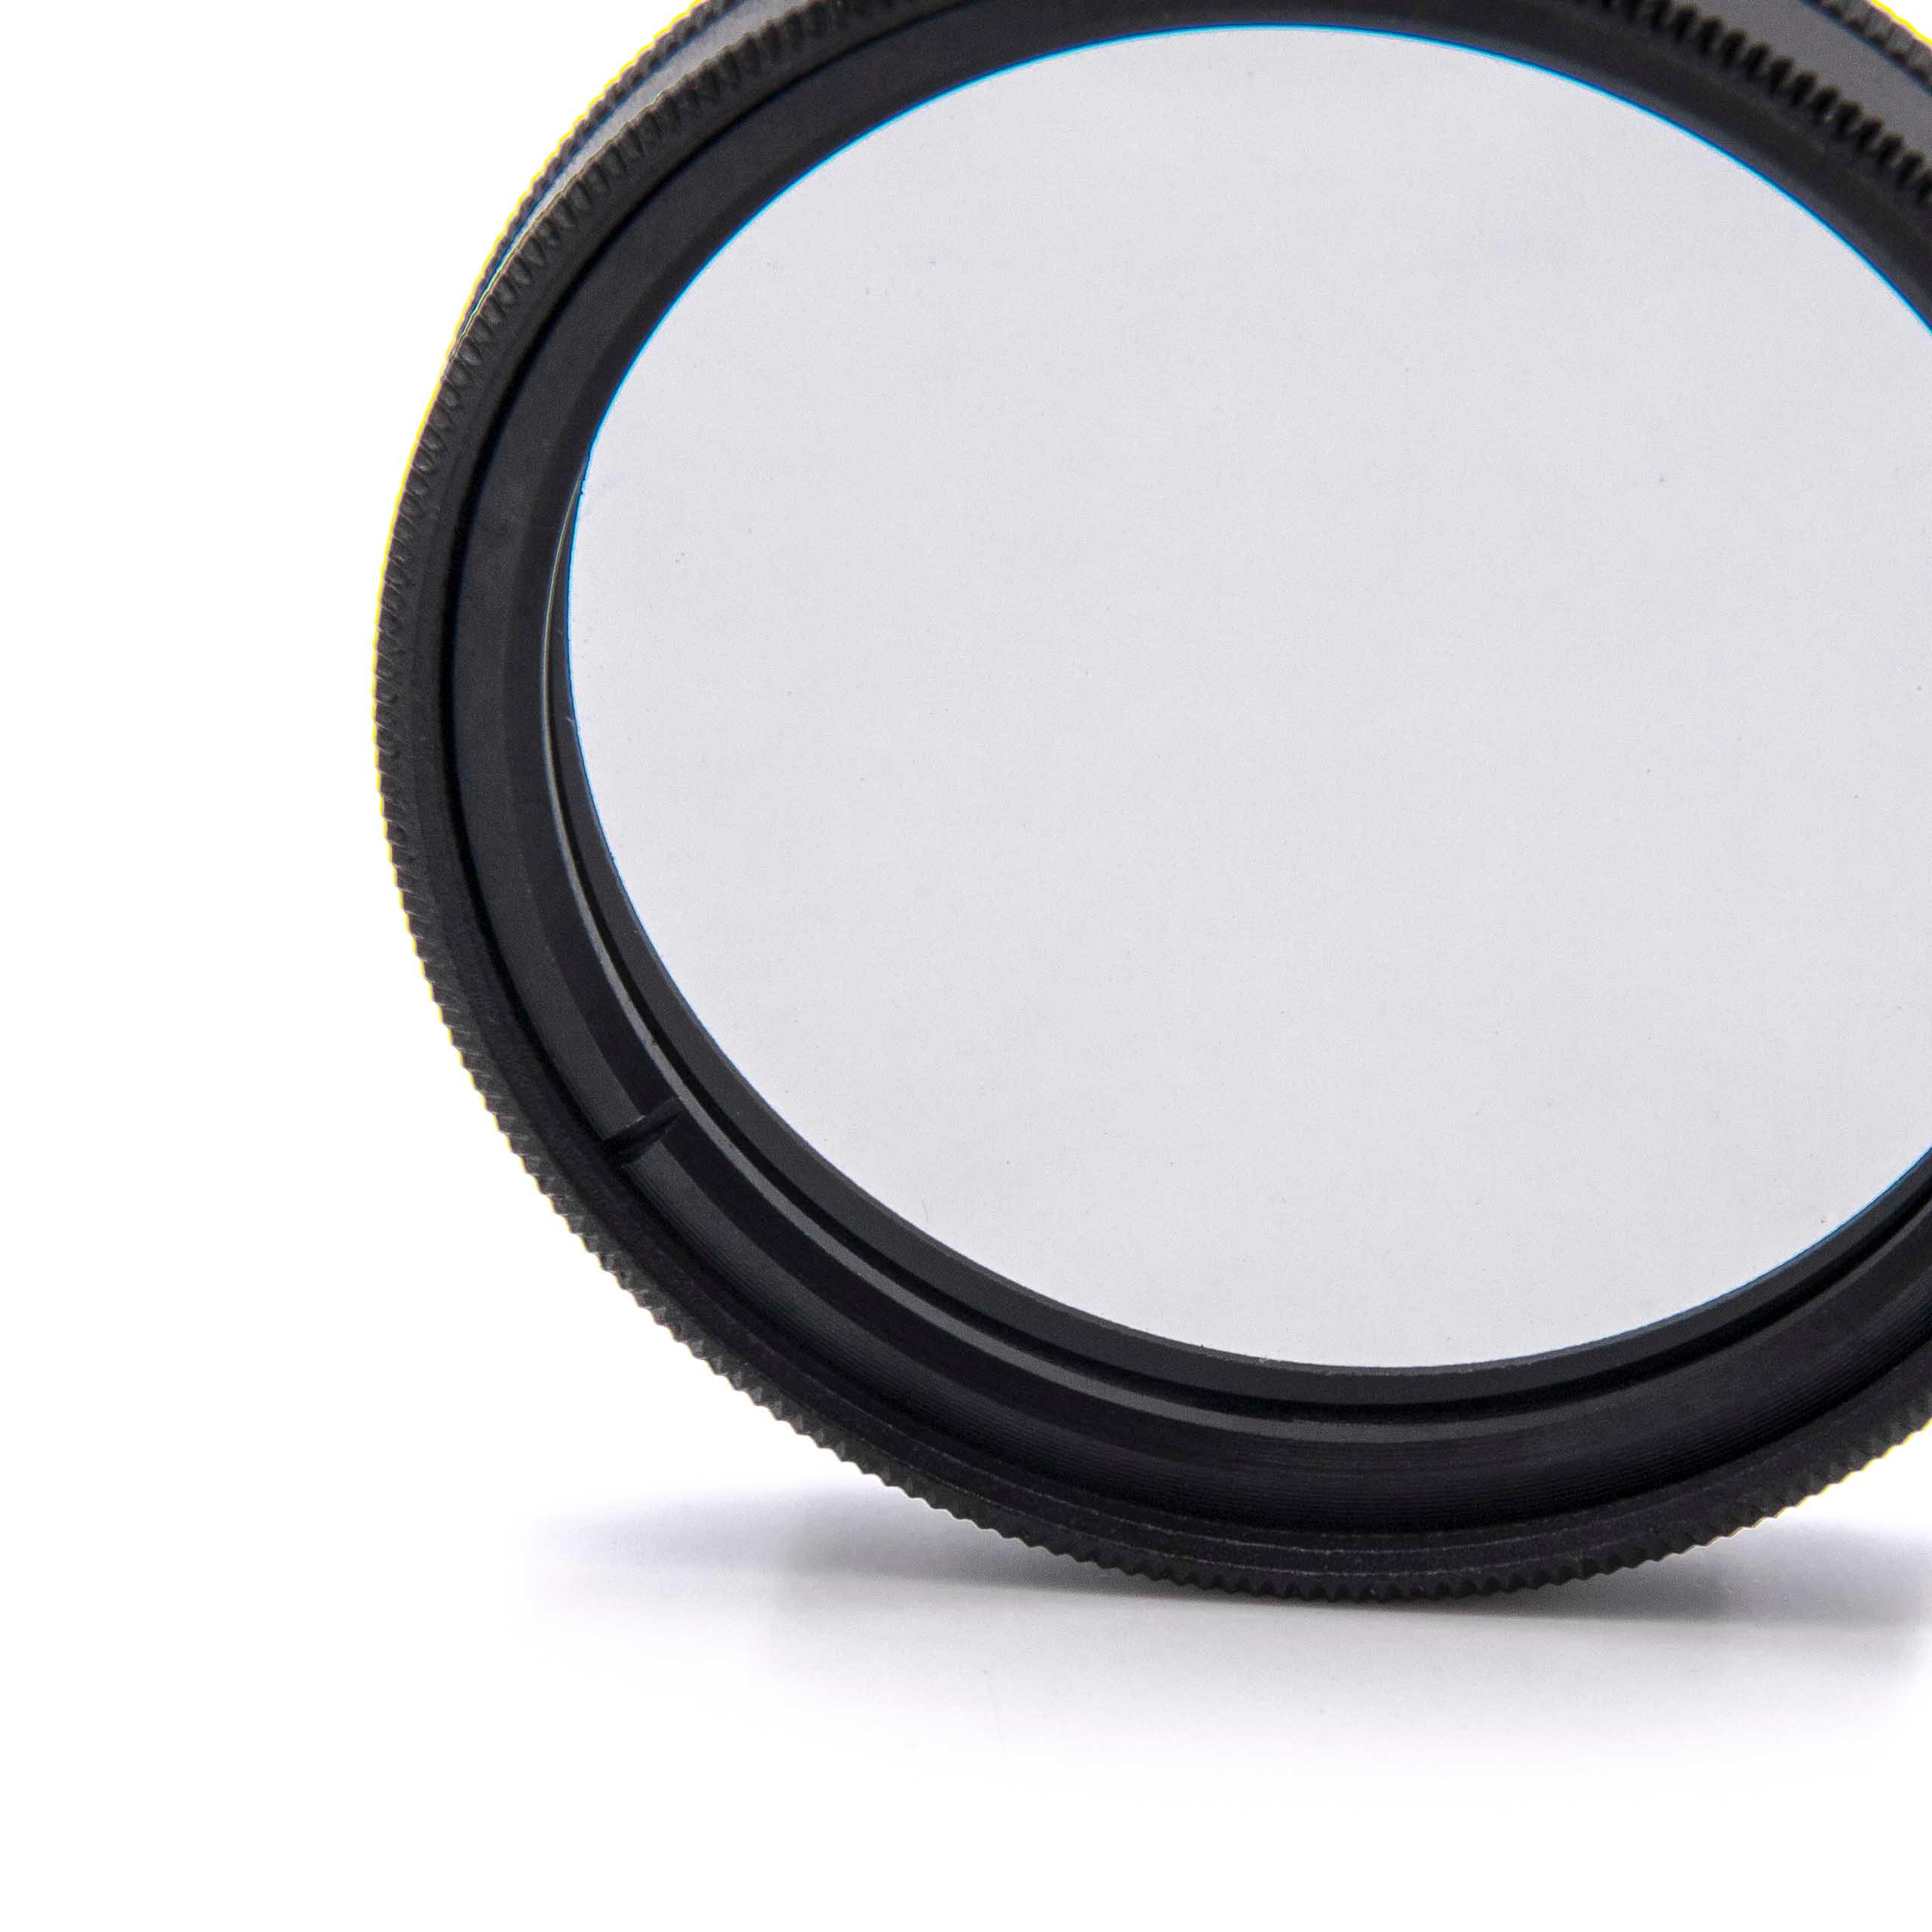 Polarising Filter suitable for Cameras & Lenses with 40.5 mm Filter Thread - CPL Filter